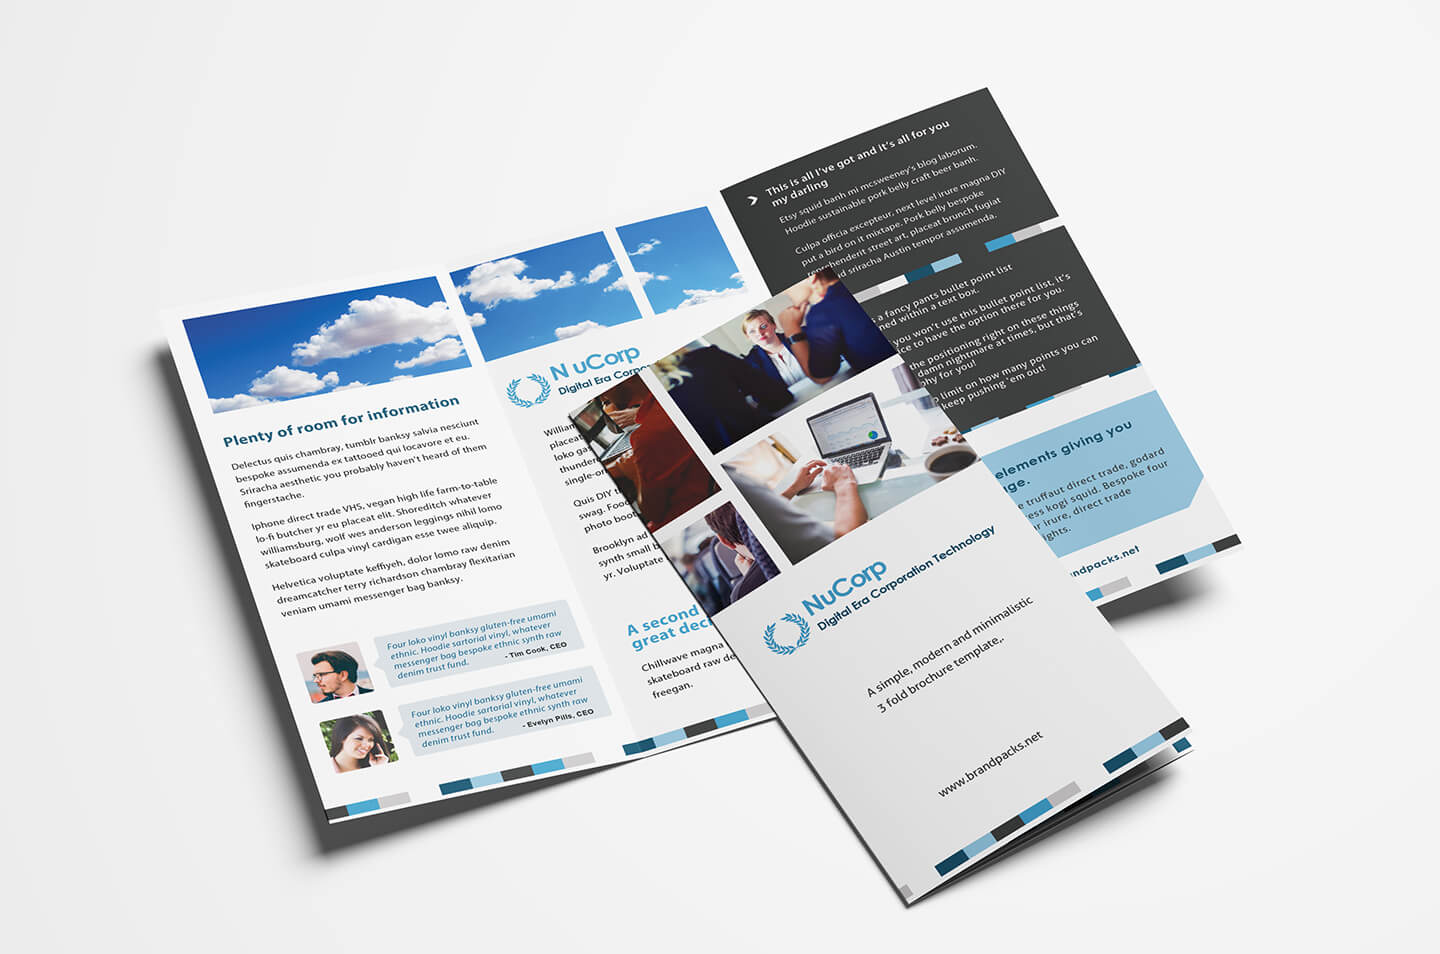 008 Free Corporate Trifold Brochure Template Fold Pertaining To Free Illustrator Brochure Templates Download